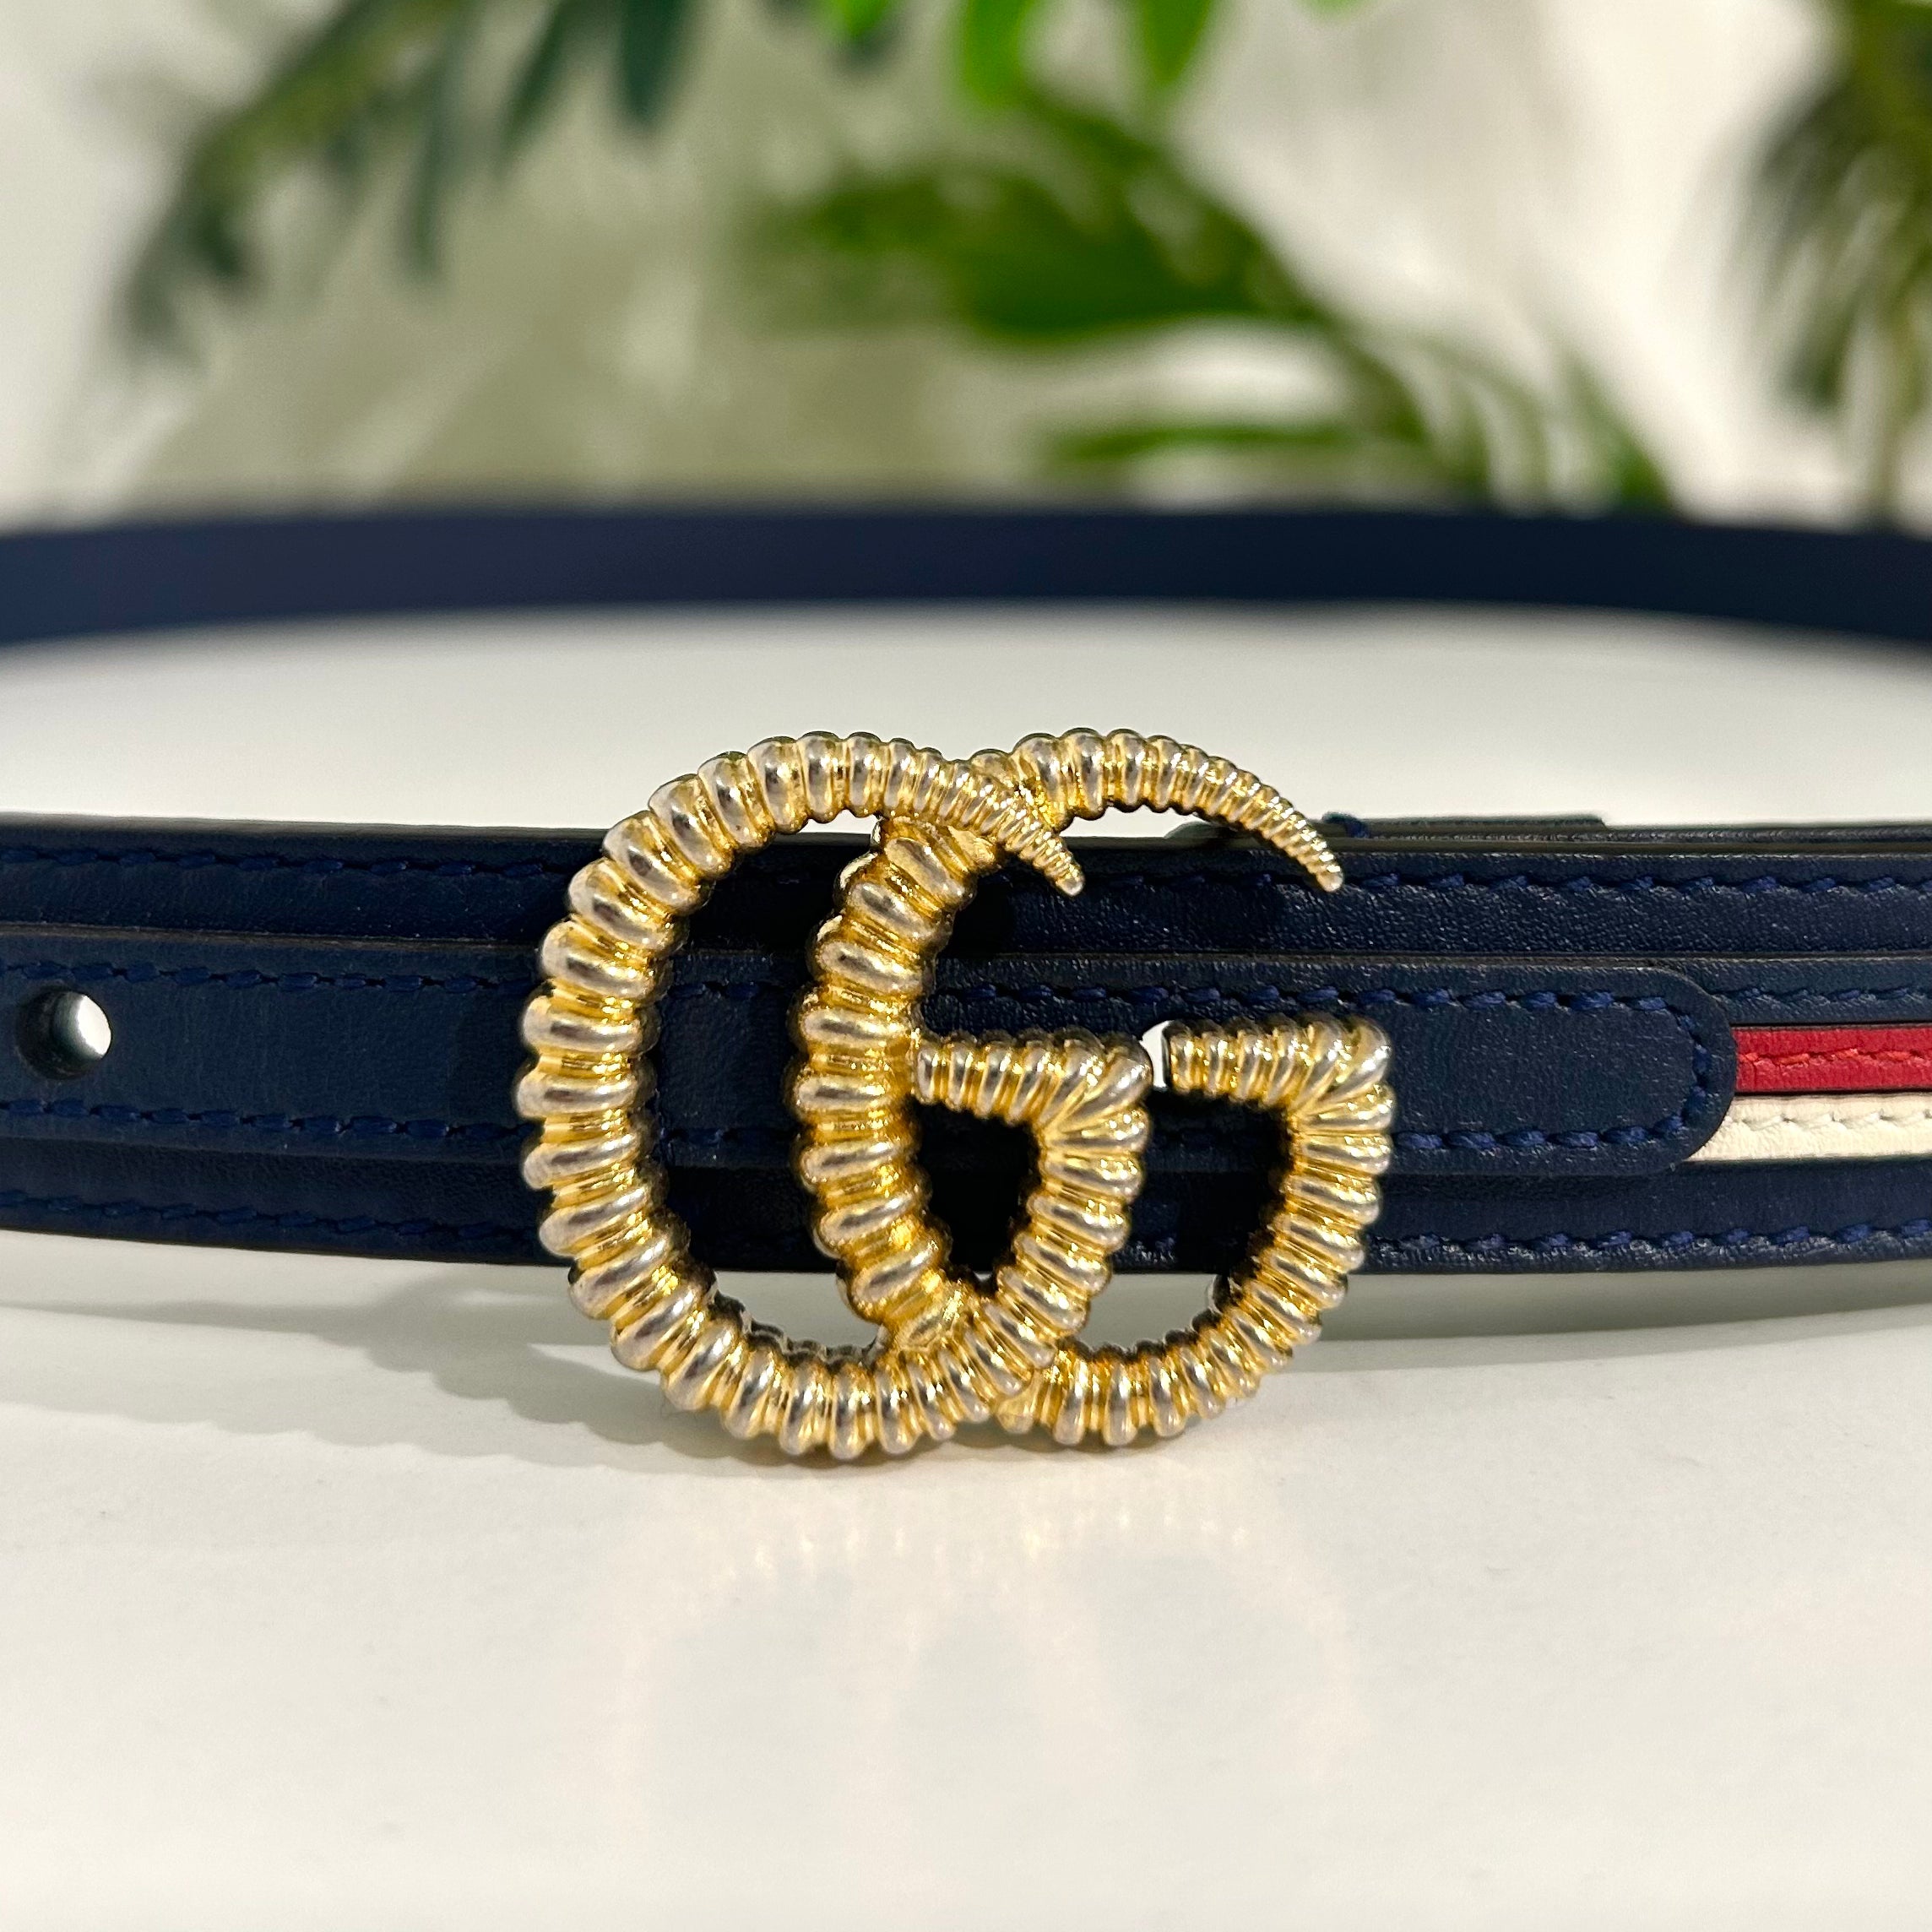 Gucci Torchon Sylvie Navy & Red Stripe Thin Belt – Dina C's Fab and Funky  Consignment Boutique